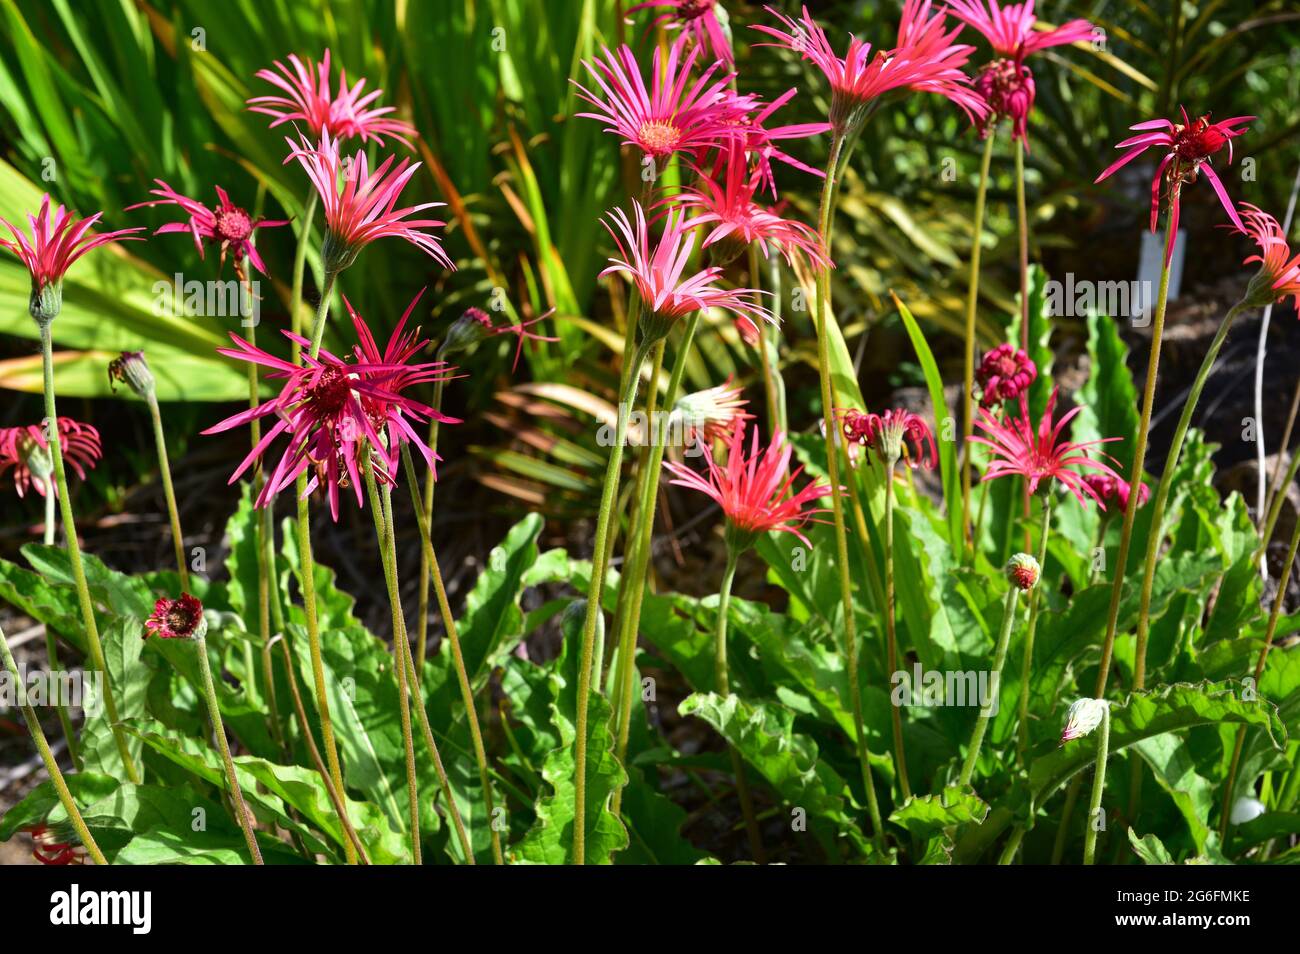 Barberton daisy (Gerbera jamesonii) is an ornamental perennial plant native to southern Africa. Stock Photo